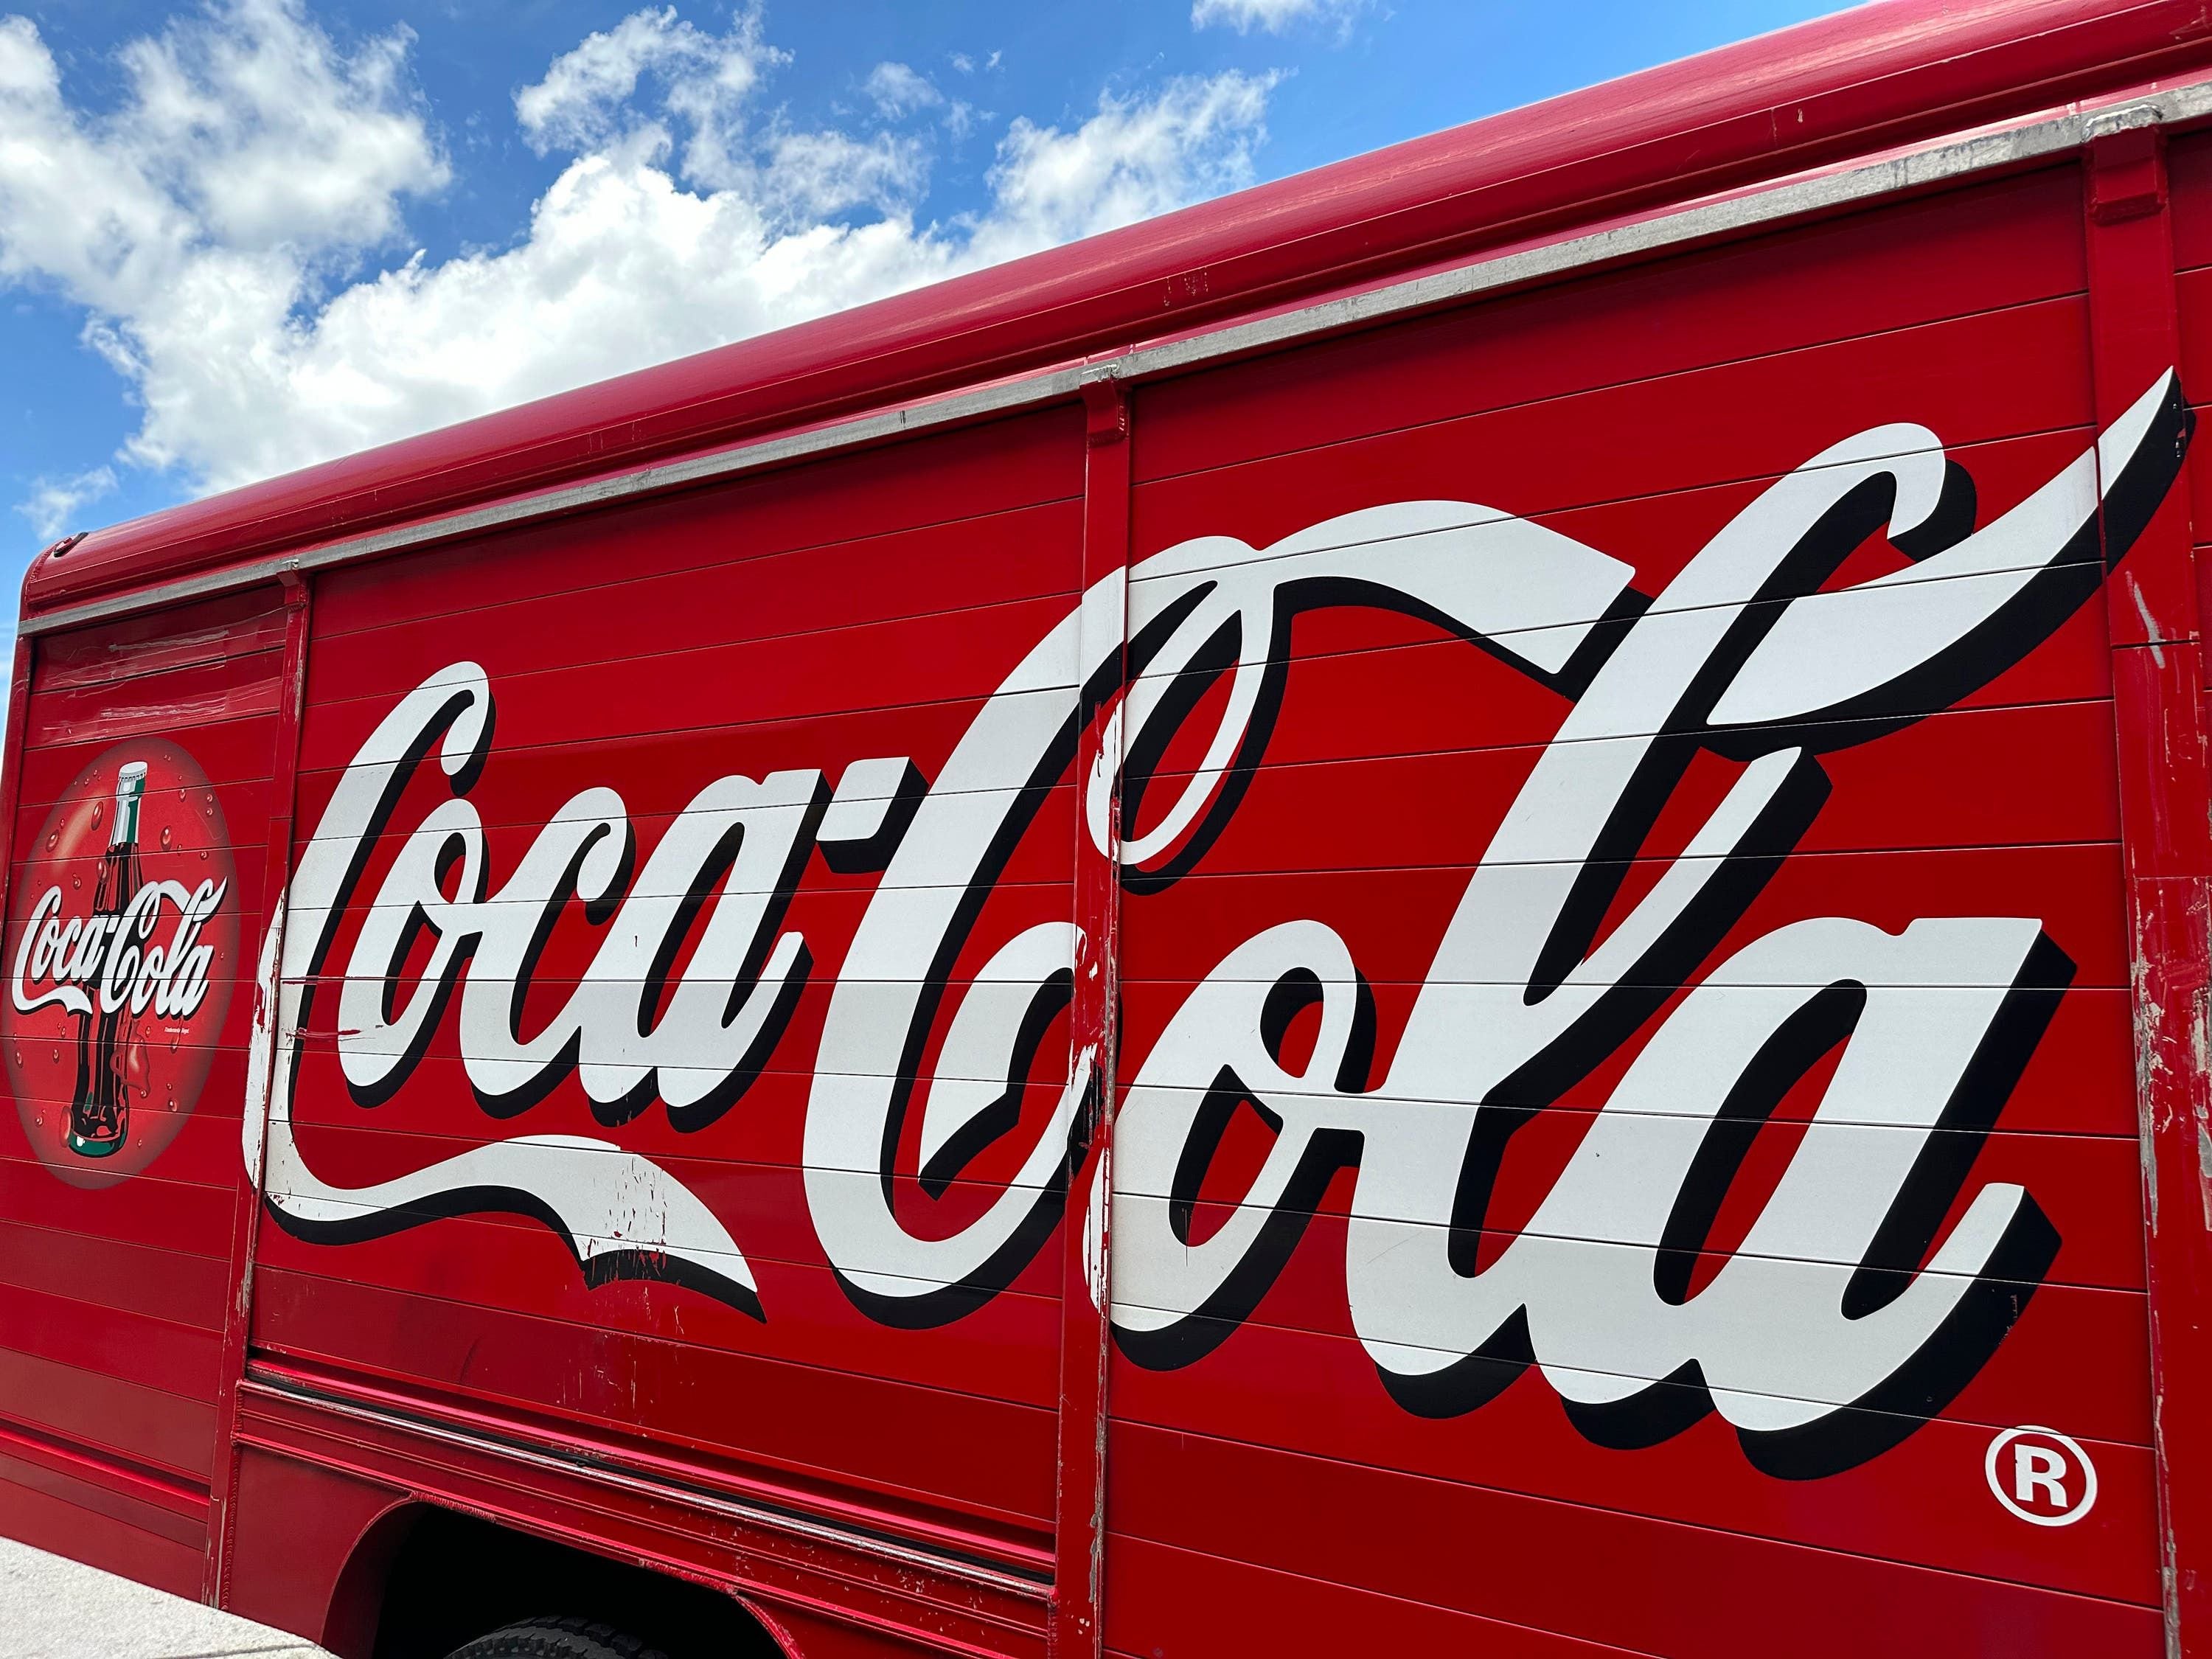 Coca-Cola raises sales guidance after stronger-than-expected second quarter